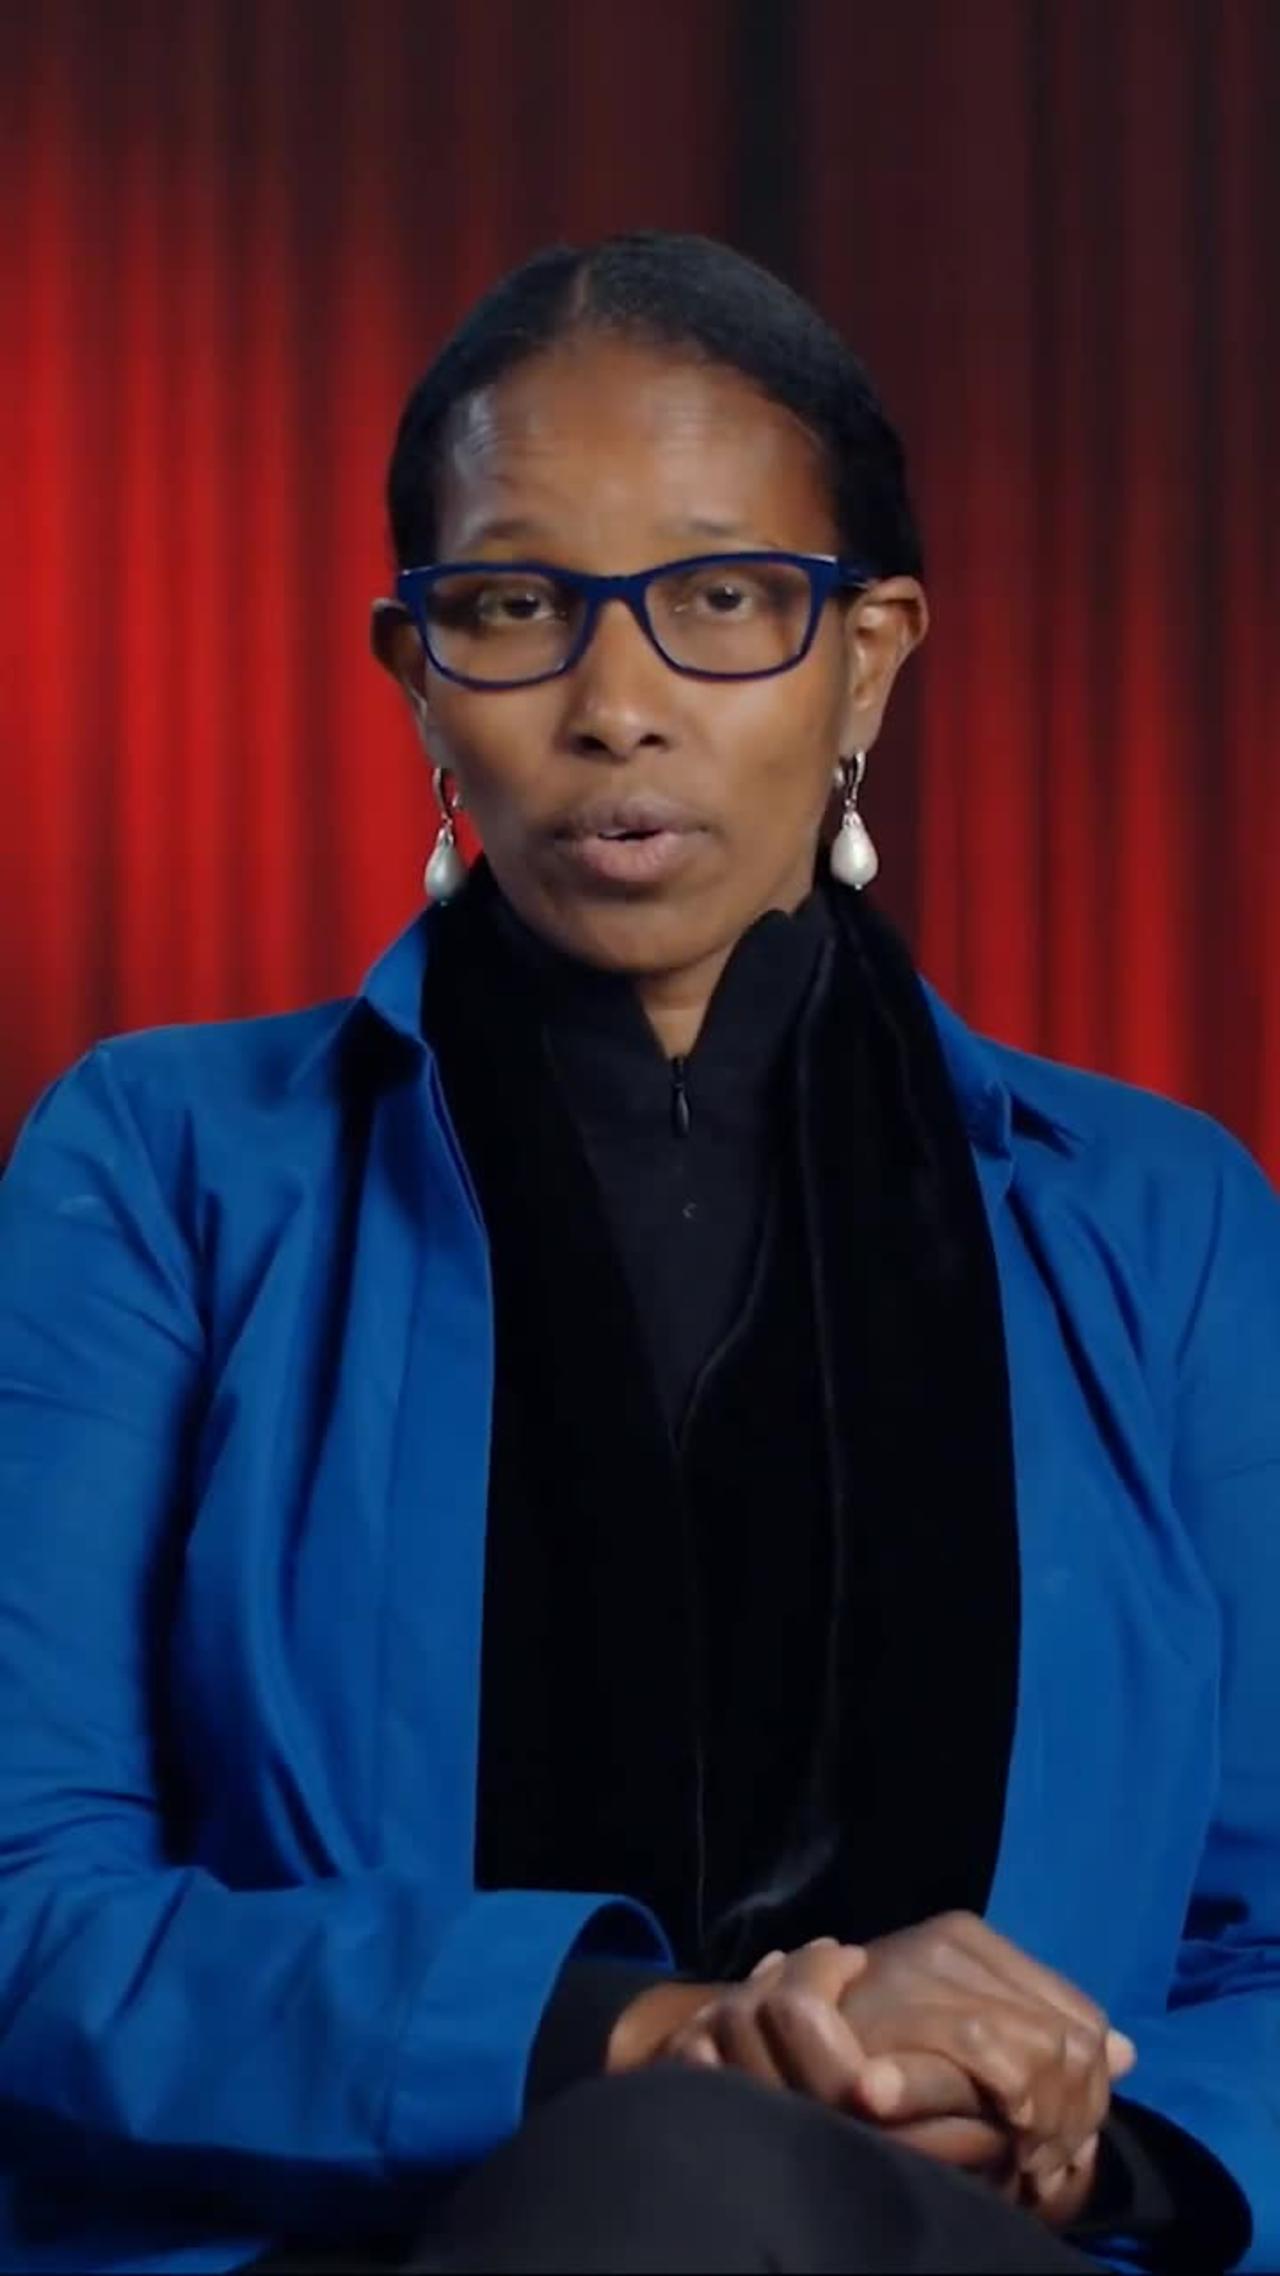 Ayaan Hirsi Ali discusses the end goals of Islamists and the Woke